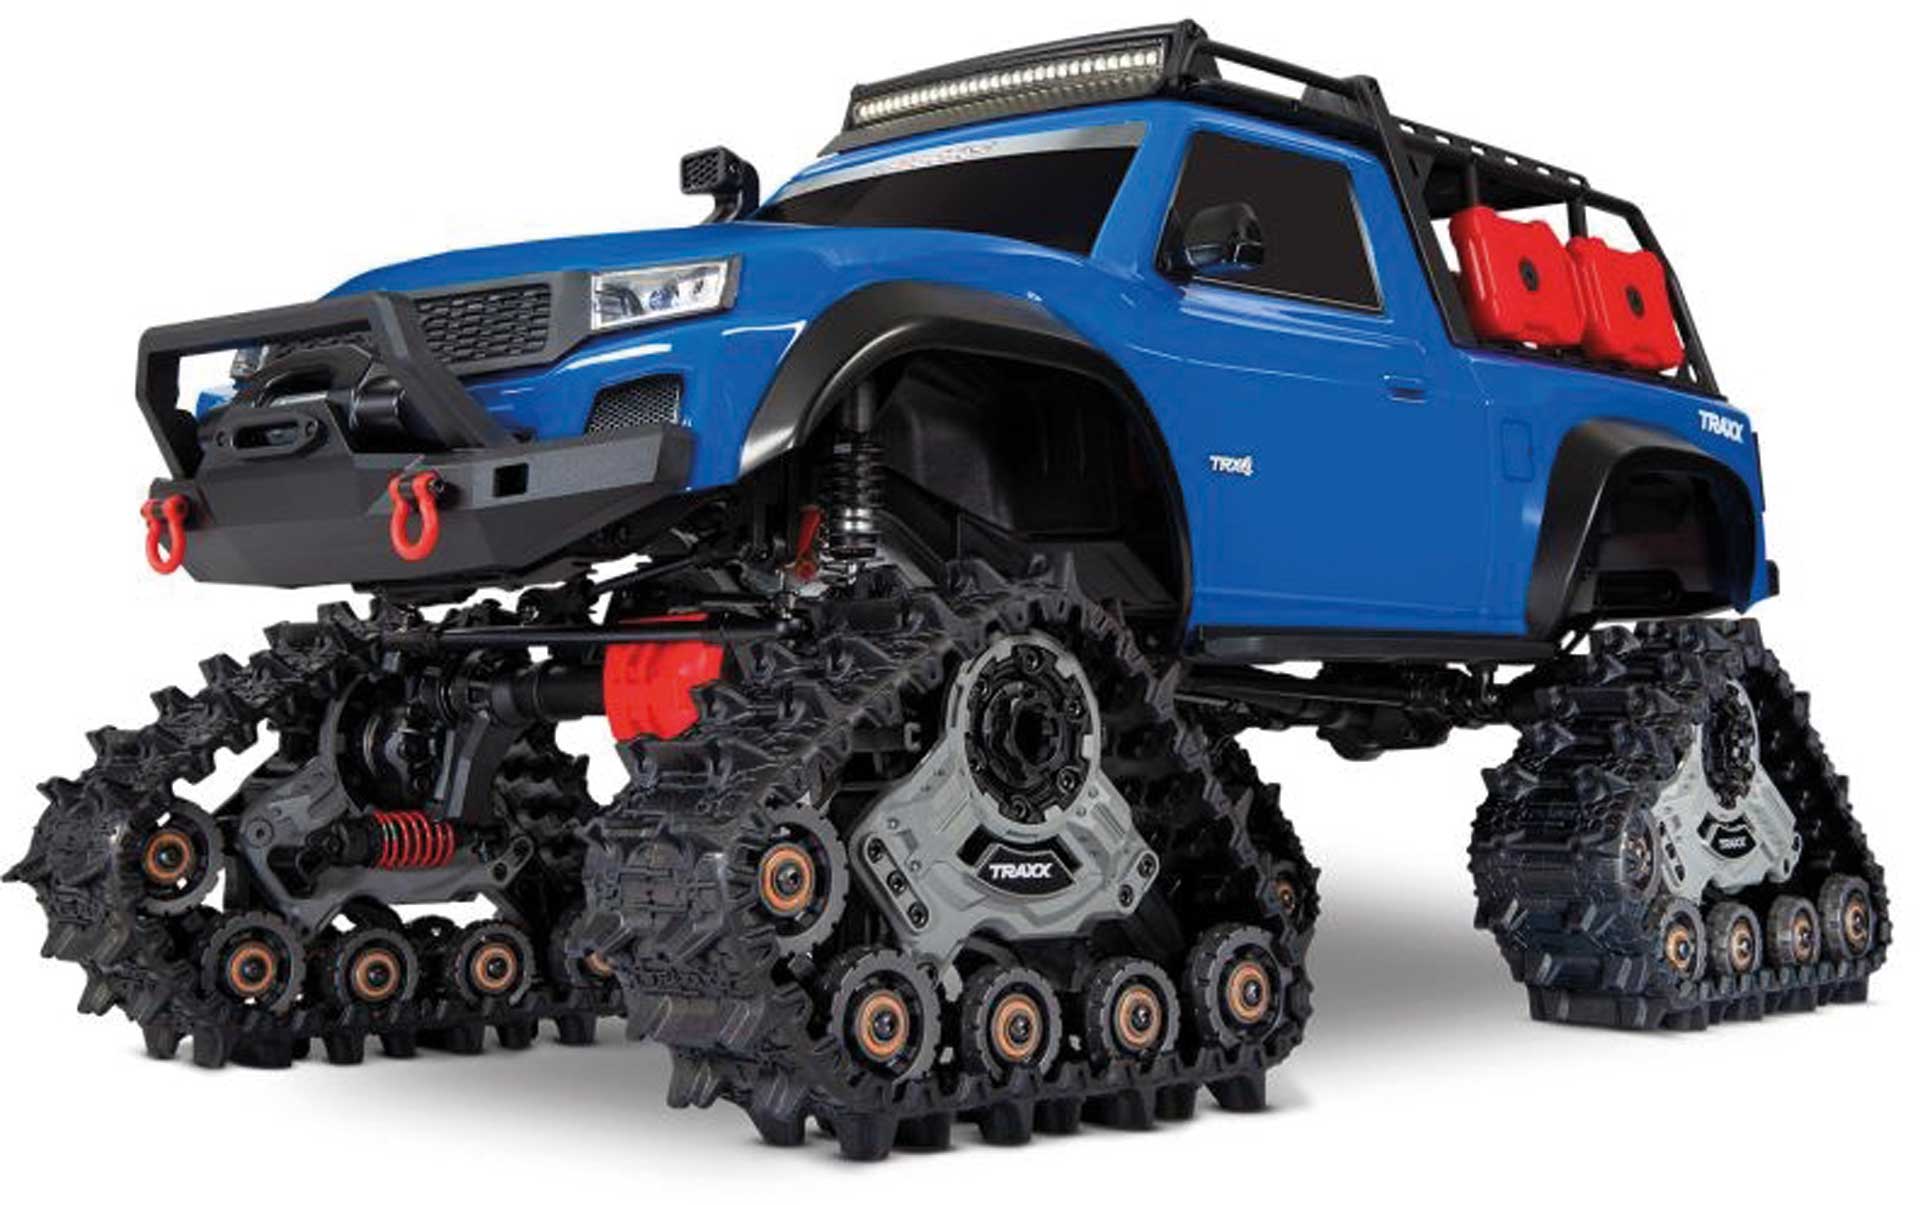 TRAXXAS TRX-4 SPORT BLUE 1/10 SCALE CRAWLER RTR BRUSHED DEEP-TERRAIN TRAXX WITHOUT BATTE